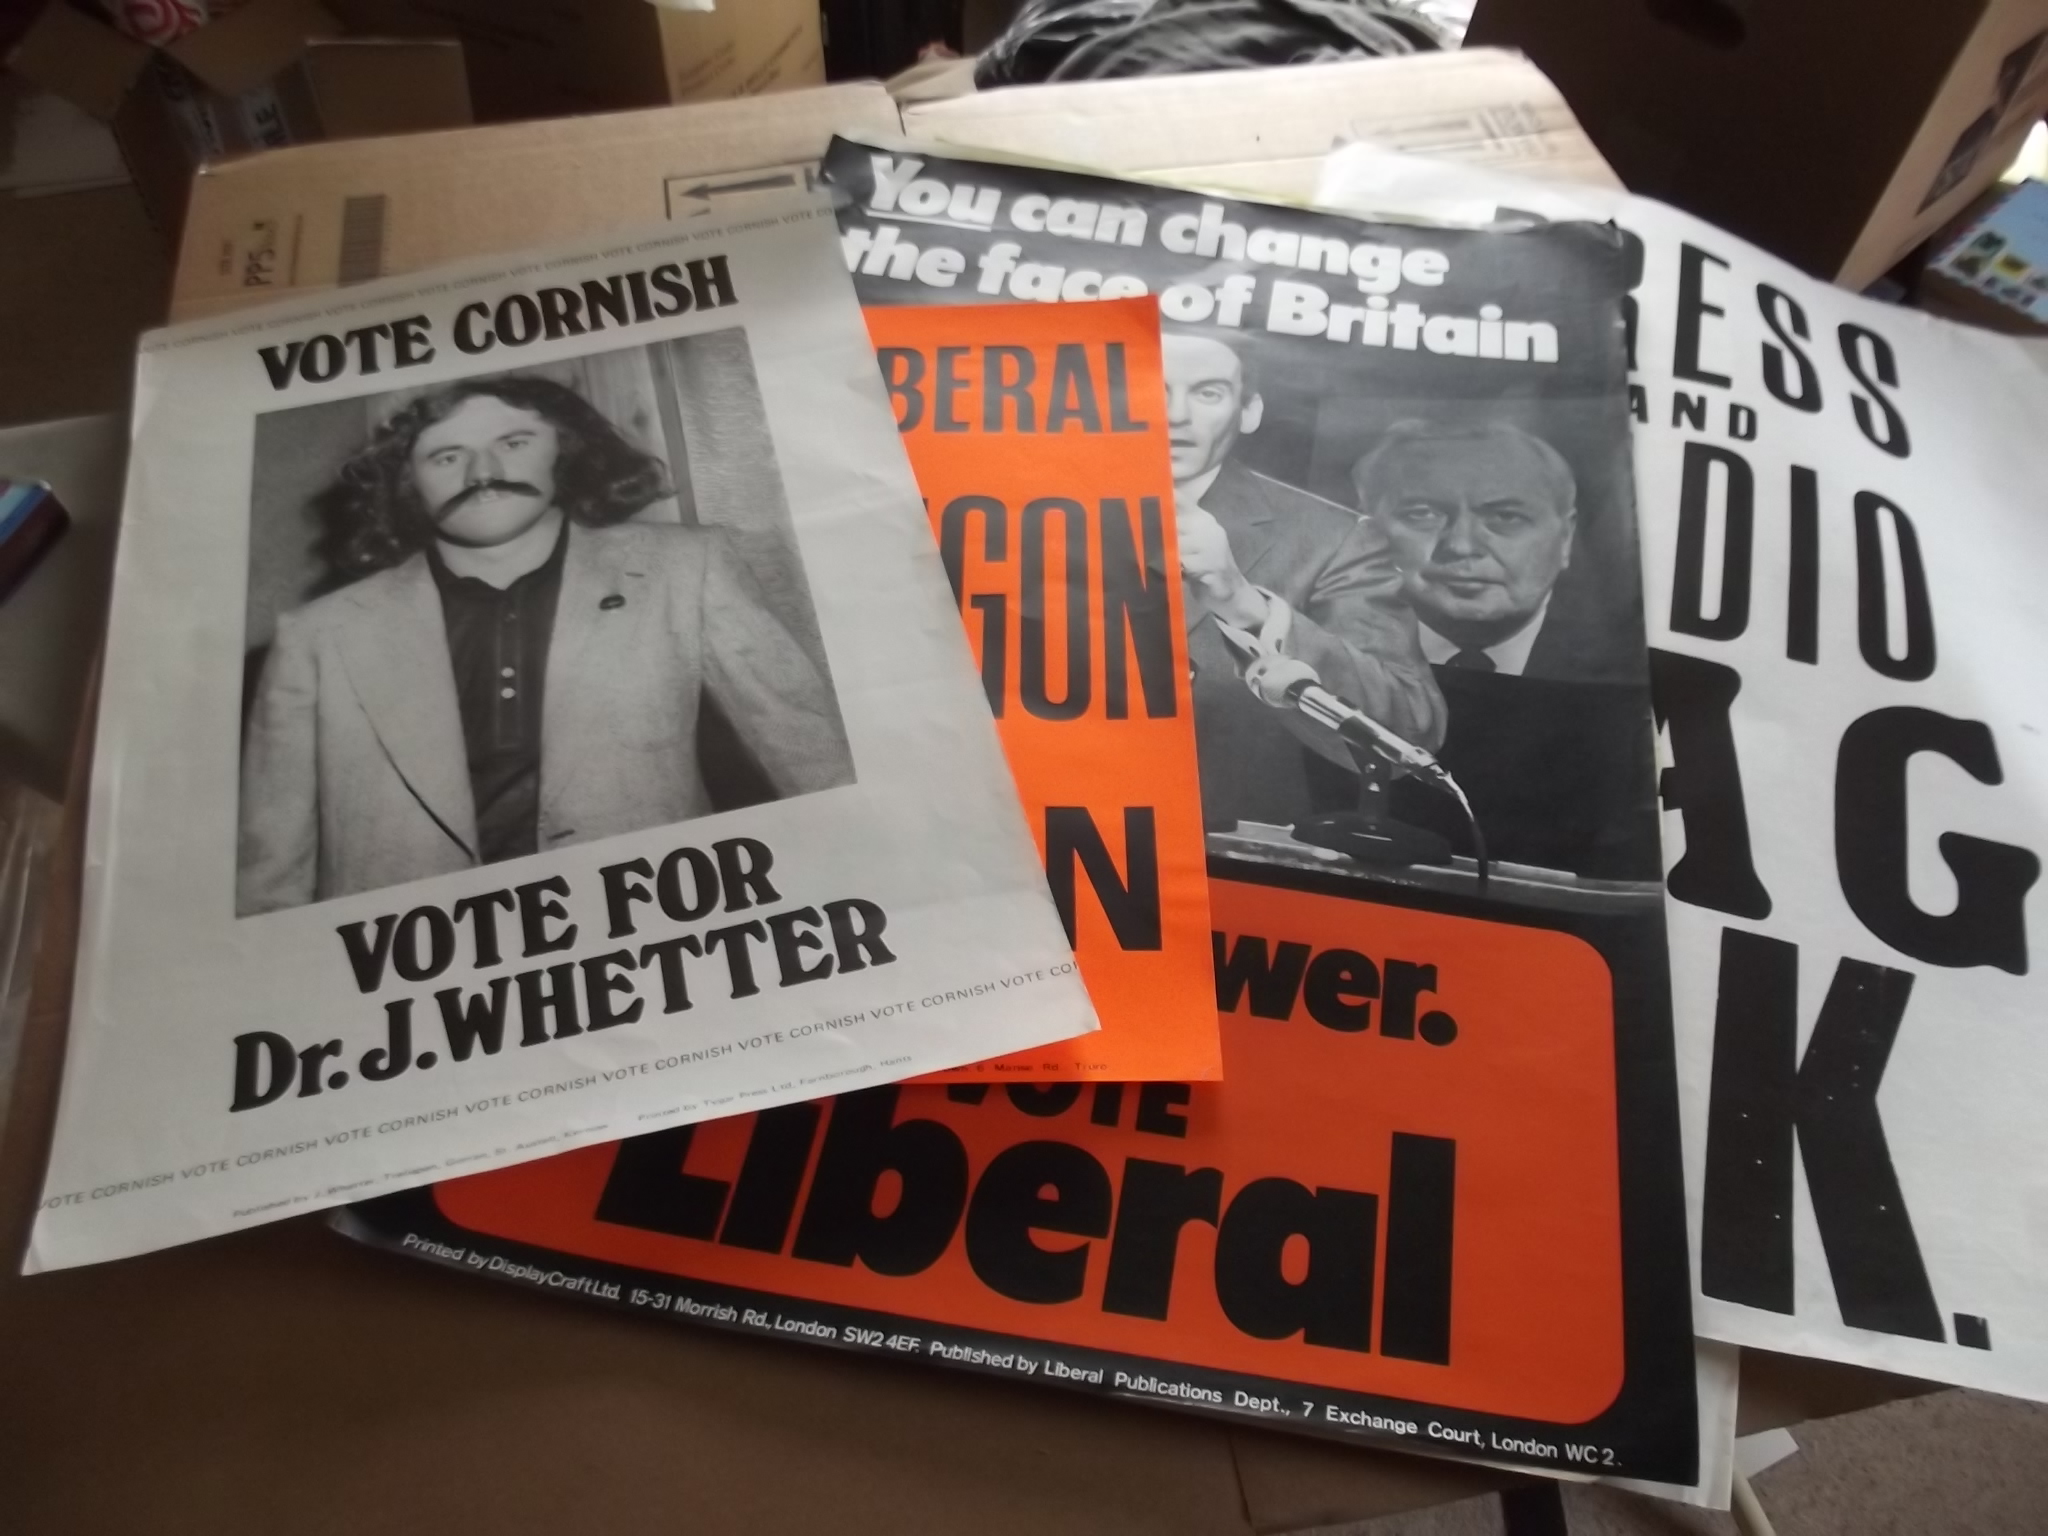 ORIGINAL POSTERS. 15 Political Posters c1970 & later incl Jeremy Thorpe, Mebyon Kernow etc.